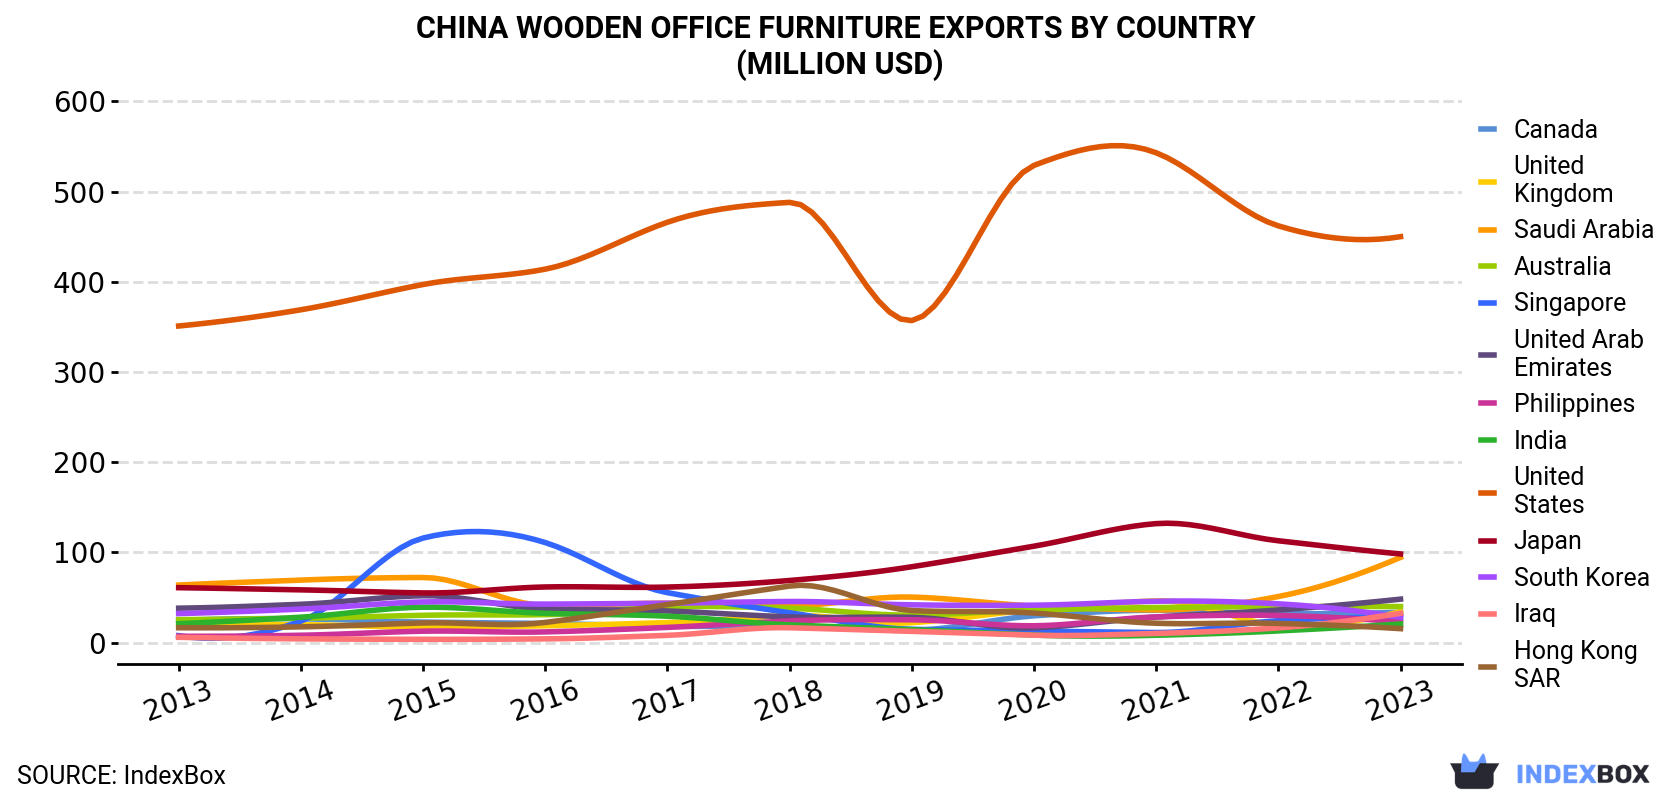 China Wooden Office Furniture Exports By Country (Million USD)